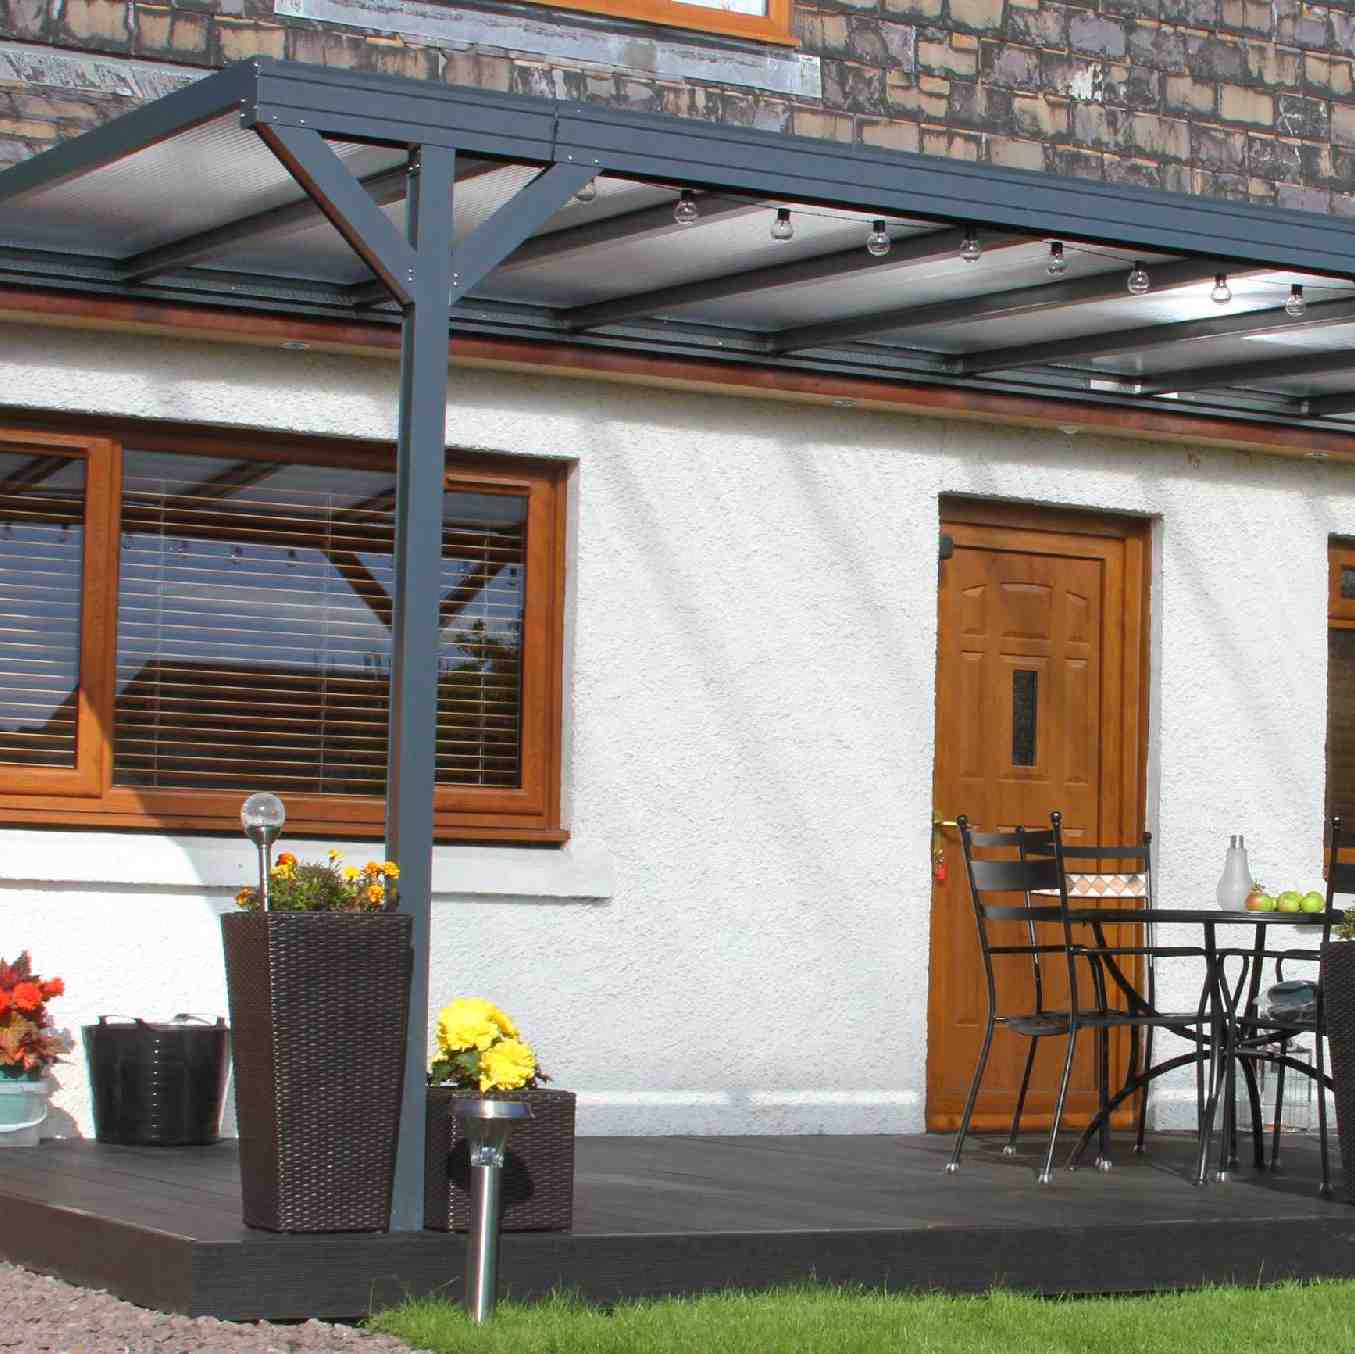 Omega Verandah, Anthracite Grey, 6mm Glass Clear Plate Polycarbonate Glazing - 7.7m (W) x 2.5m (P), (4) Supporting Posts